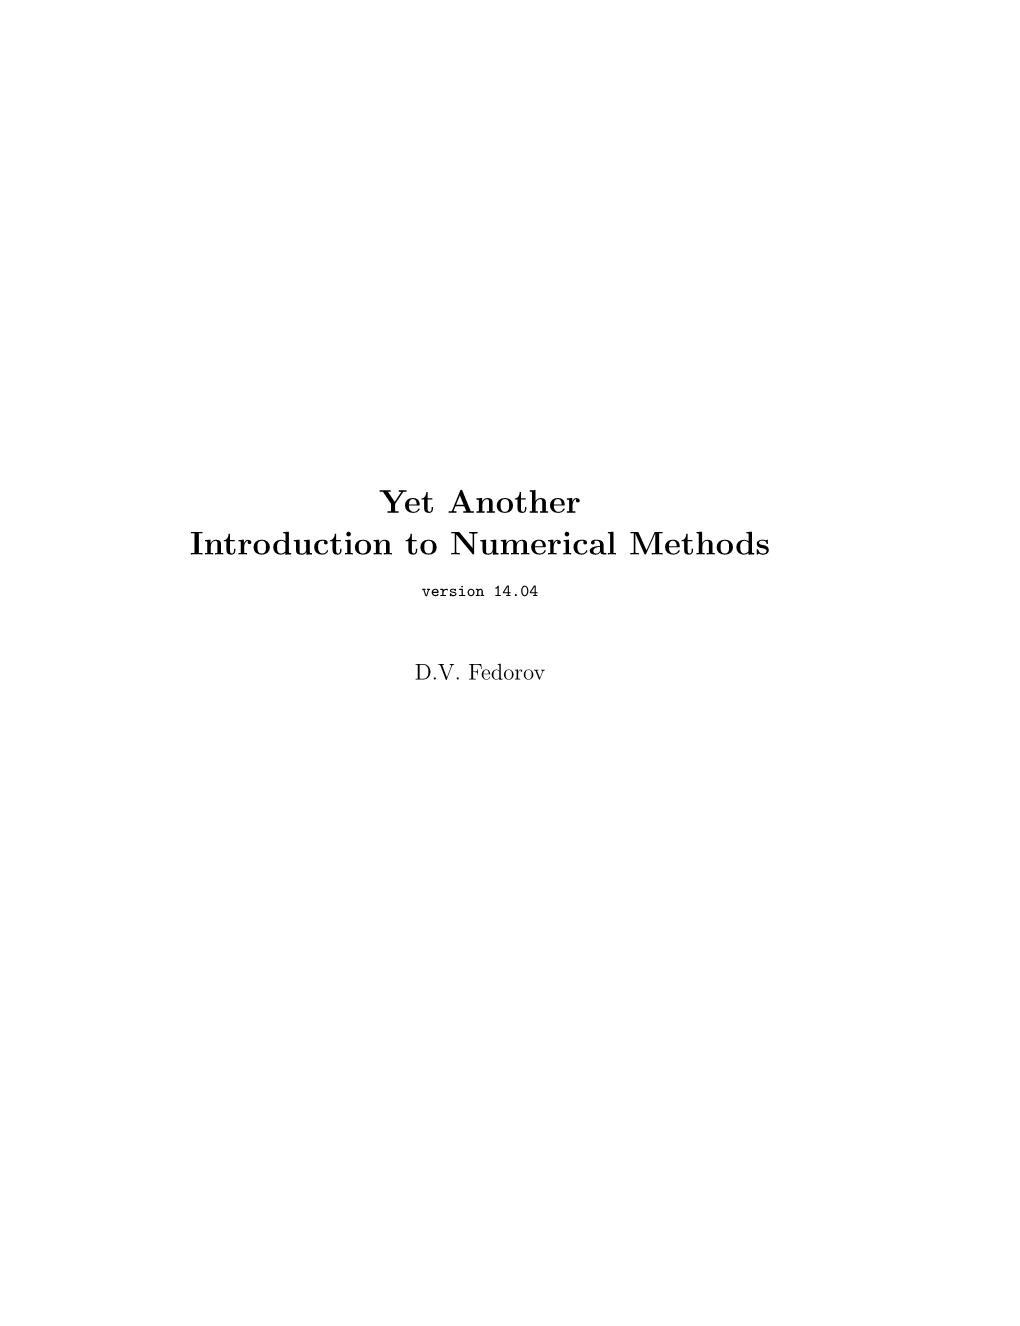 Yet Another Introduction to Numerical Methods